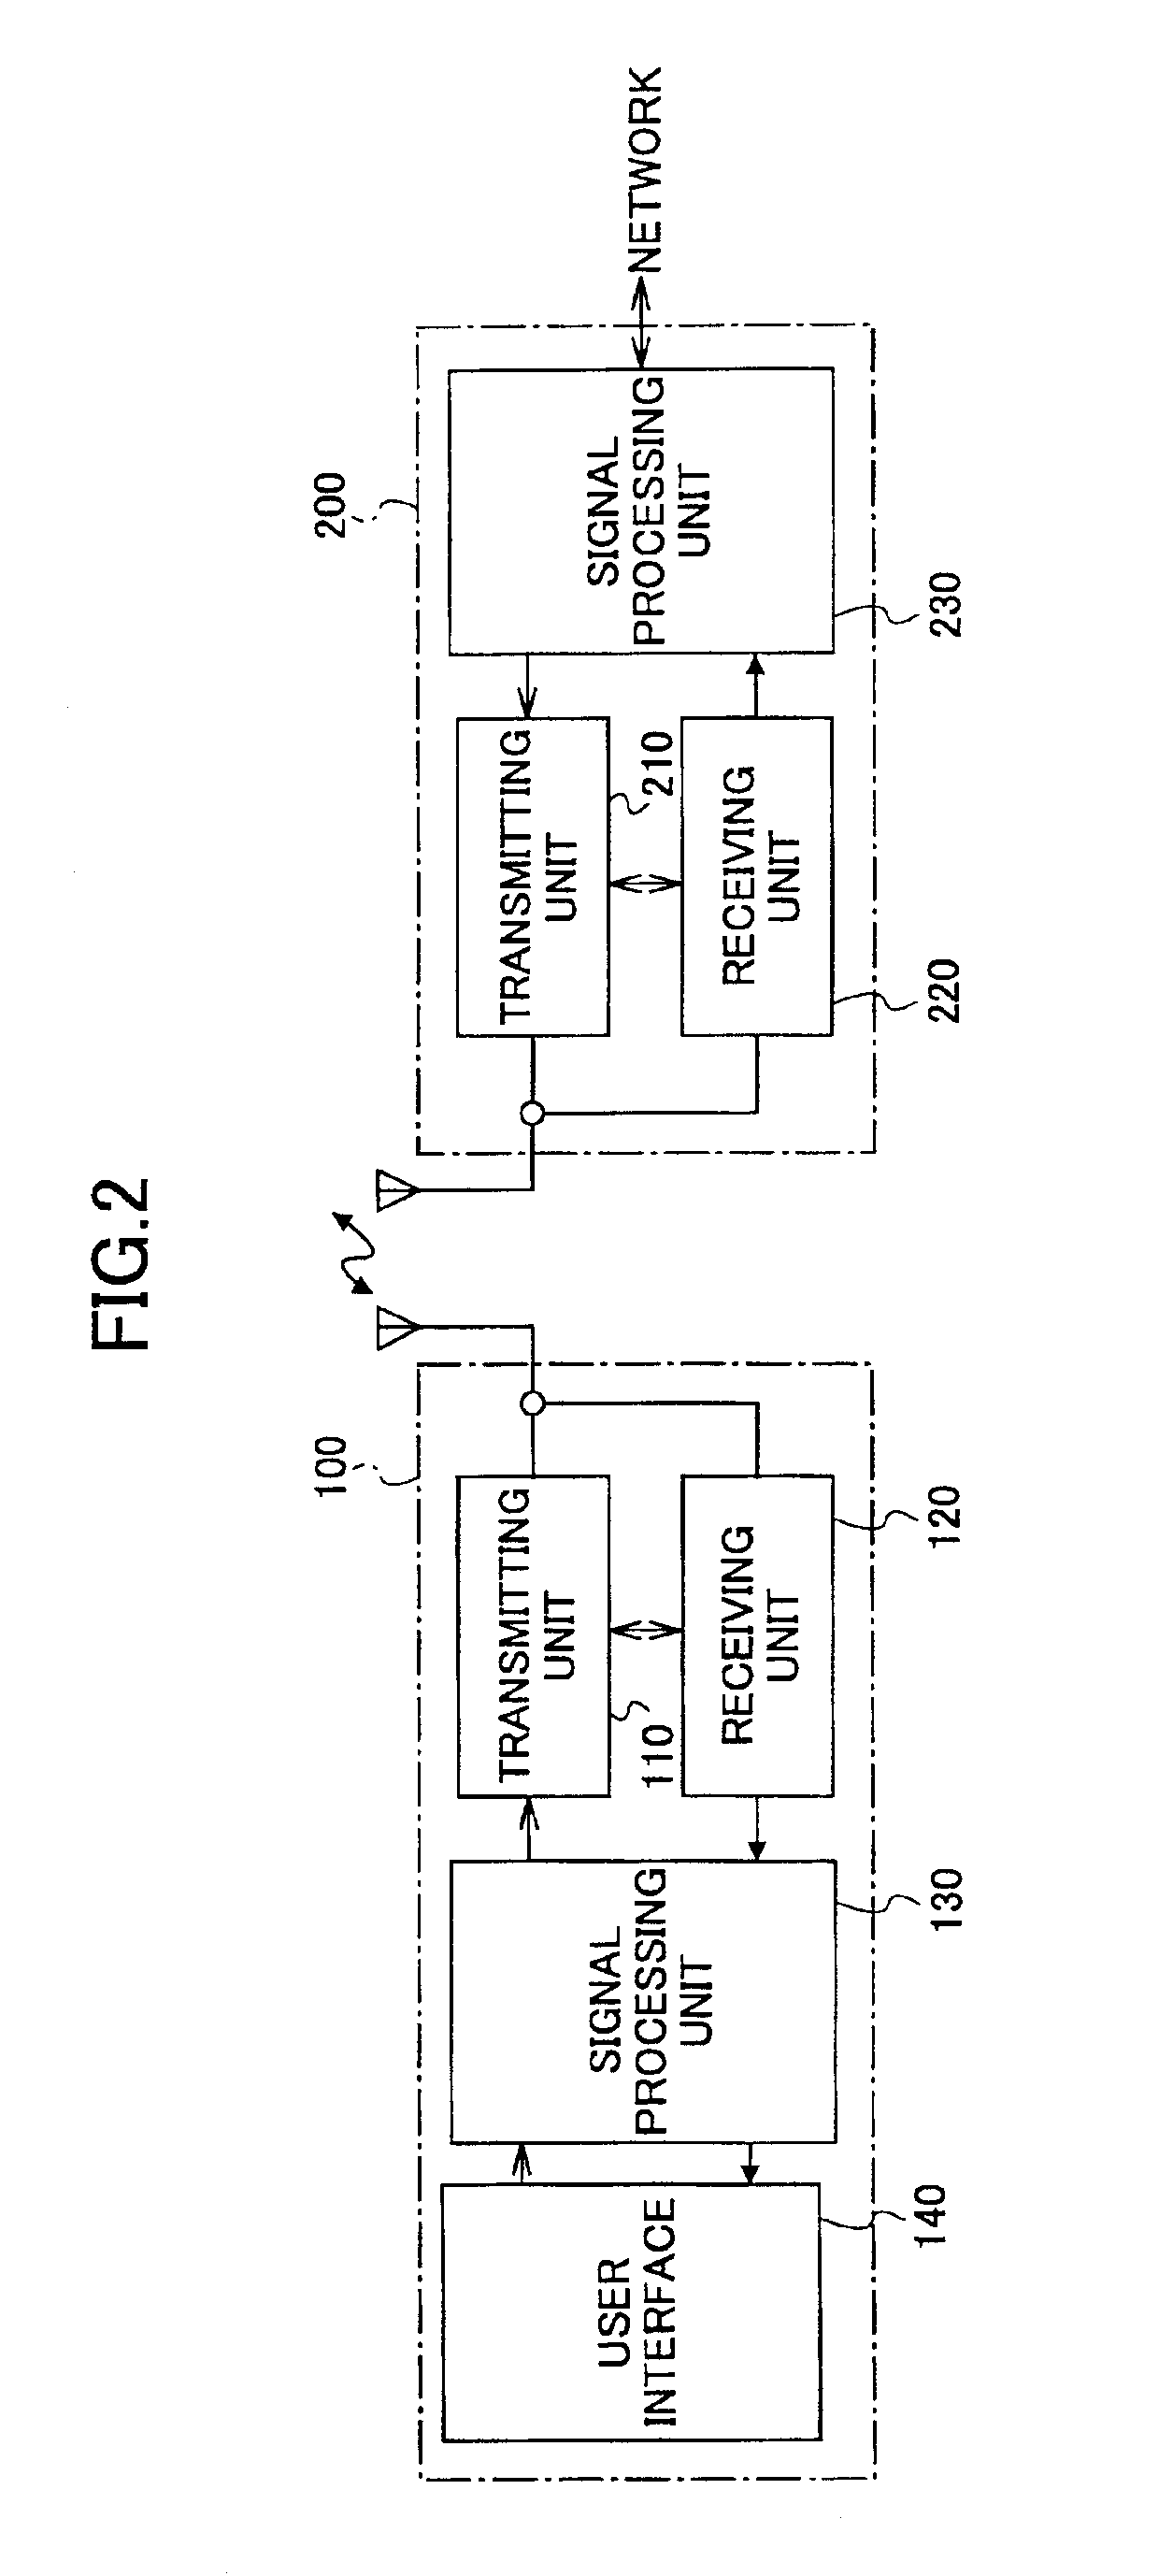 Transmit power control method and transmit power control system suitable to mobile communications